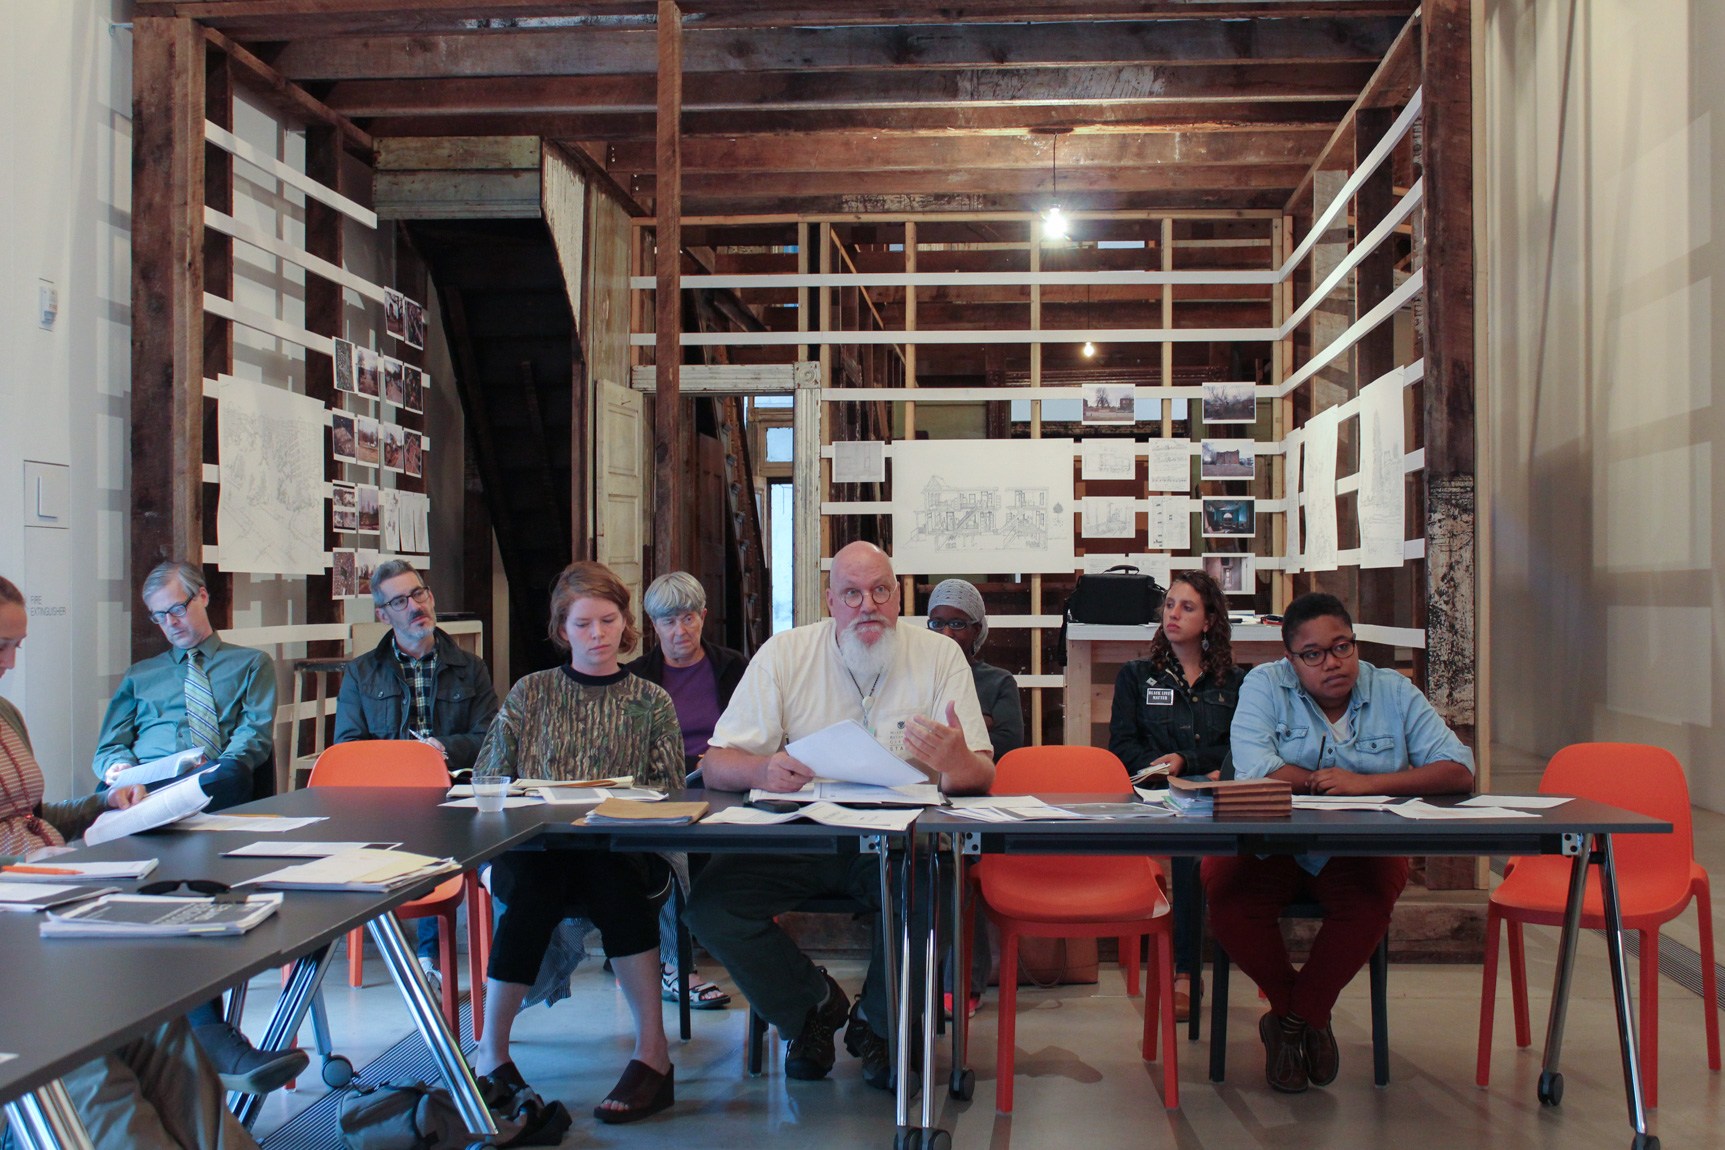 Workshop attendants sit at desks in the Main Gallery, with the installation "4562 Enright Avenue" behind them.